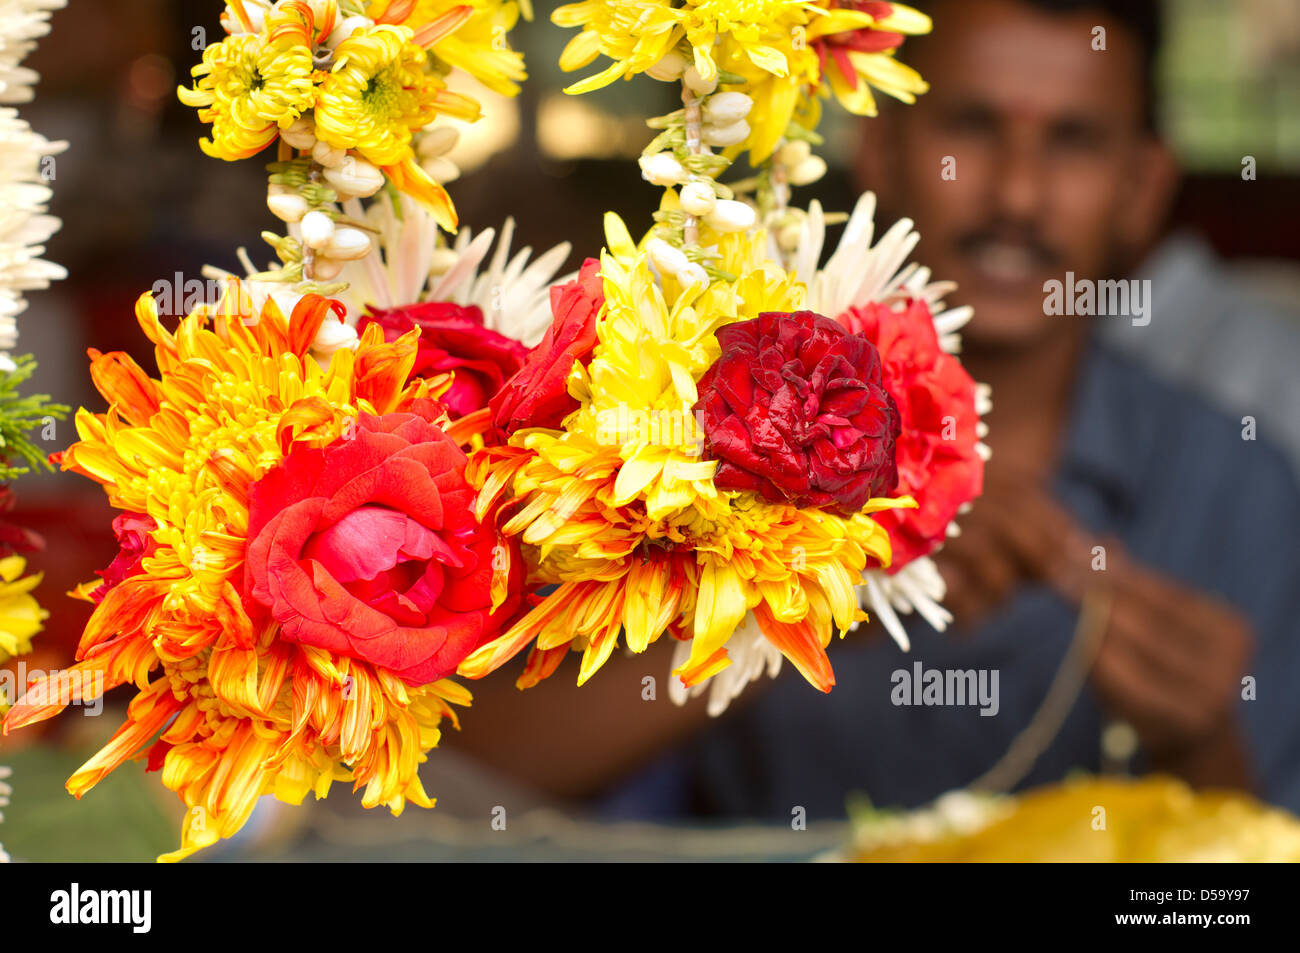 flower offerings outside a hindu temple. Photo is taken at Batu caves of Malaysia. Stock Photo